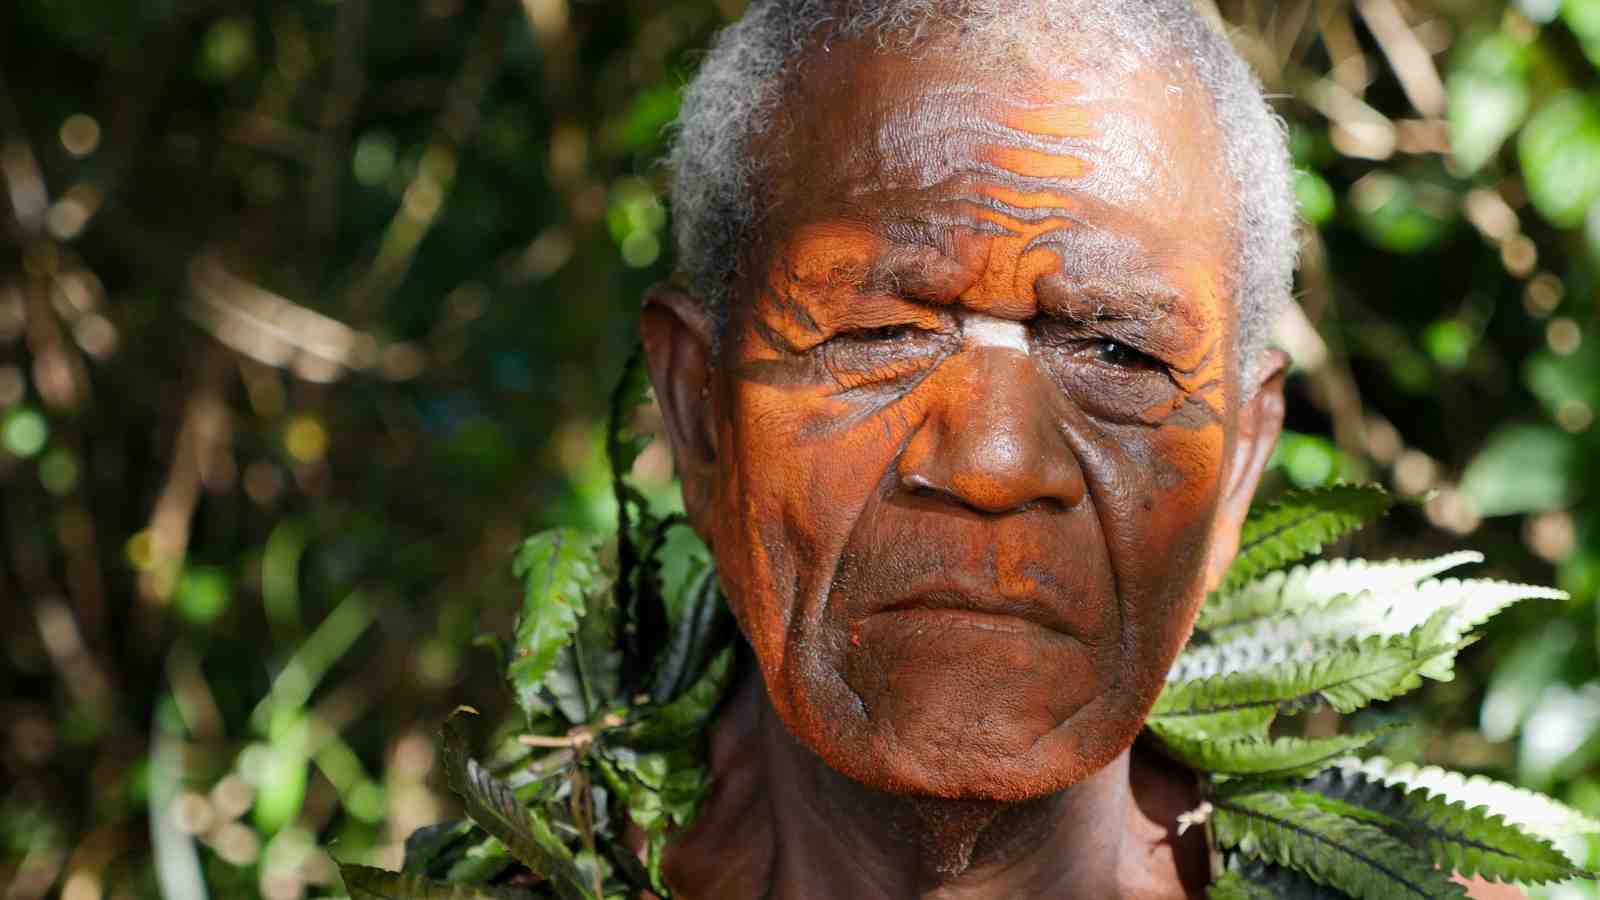 Close up of the face of a shaman from the Lak community of Papua New Guinea